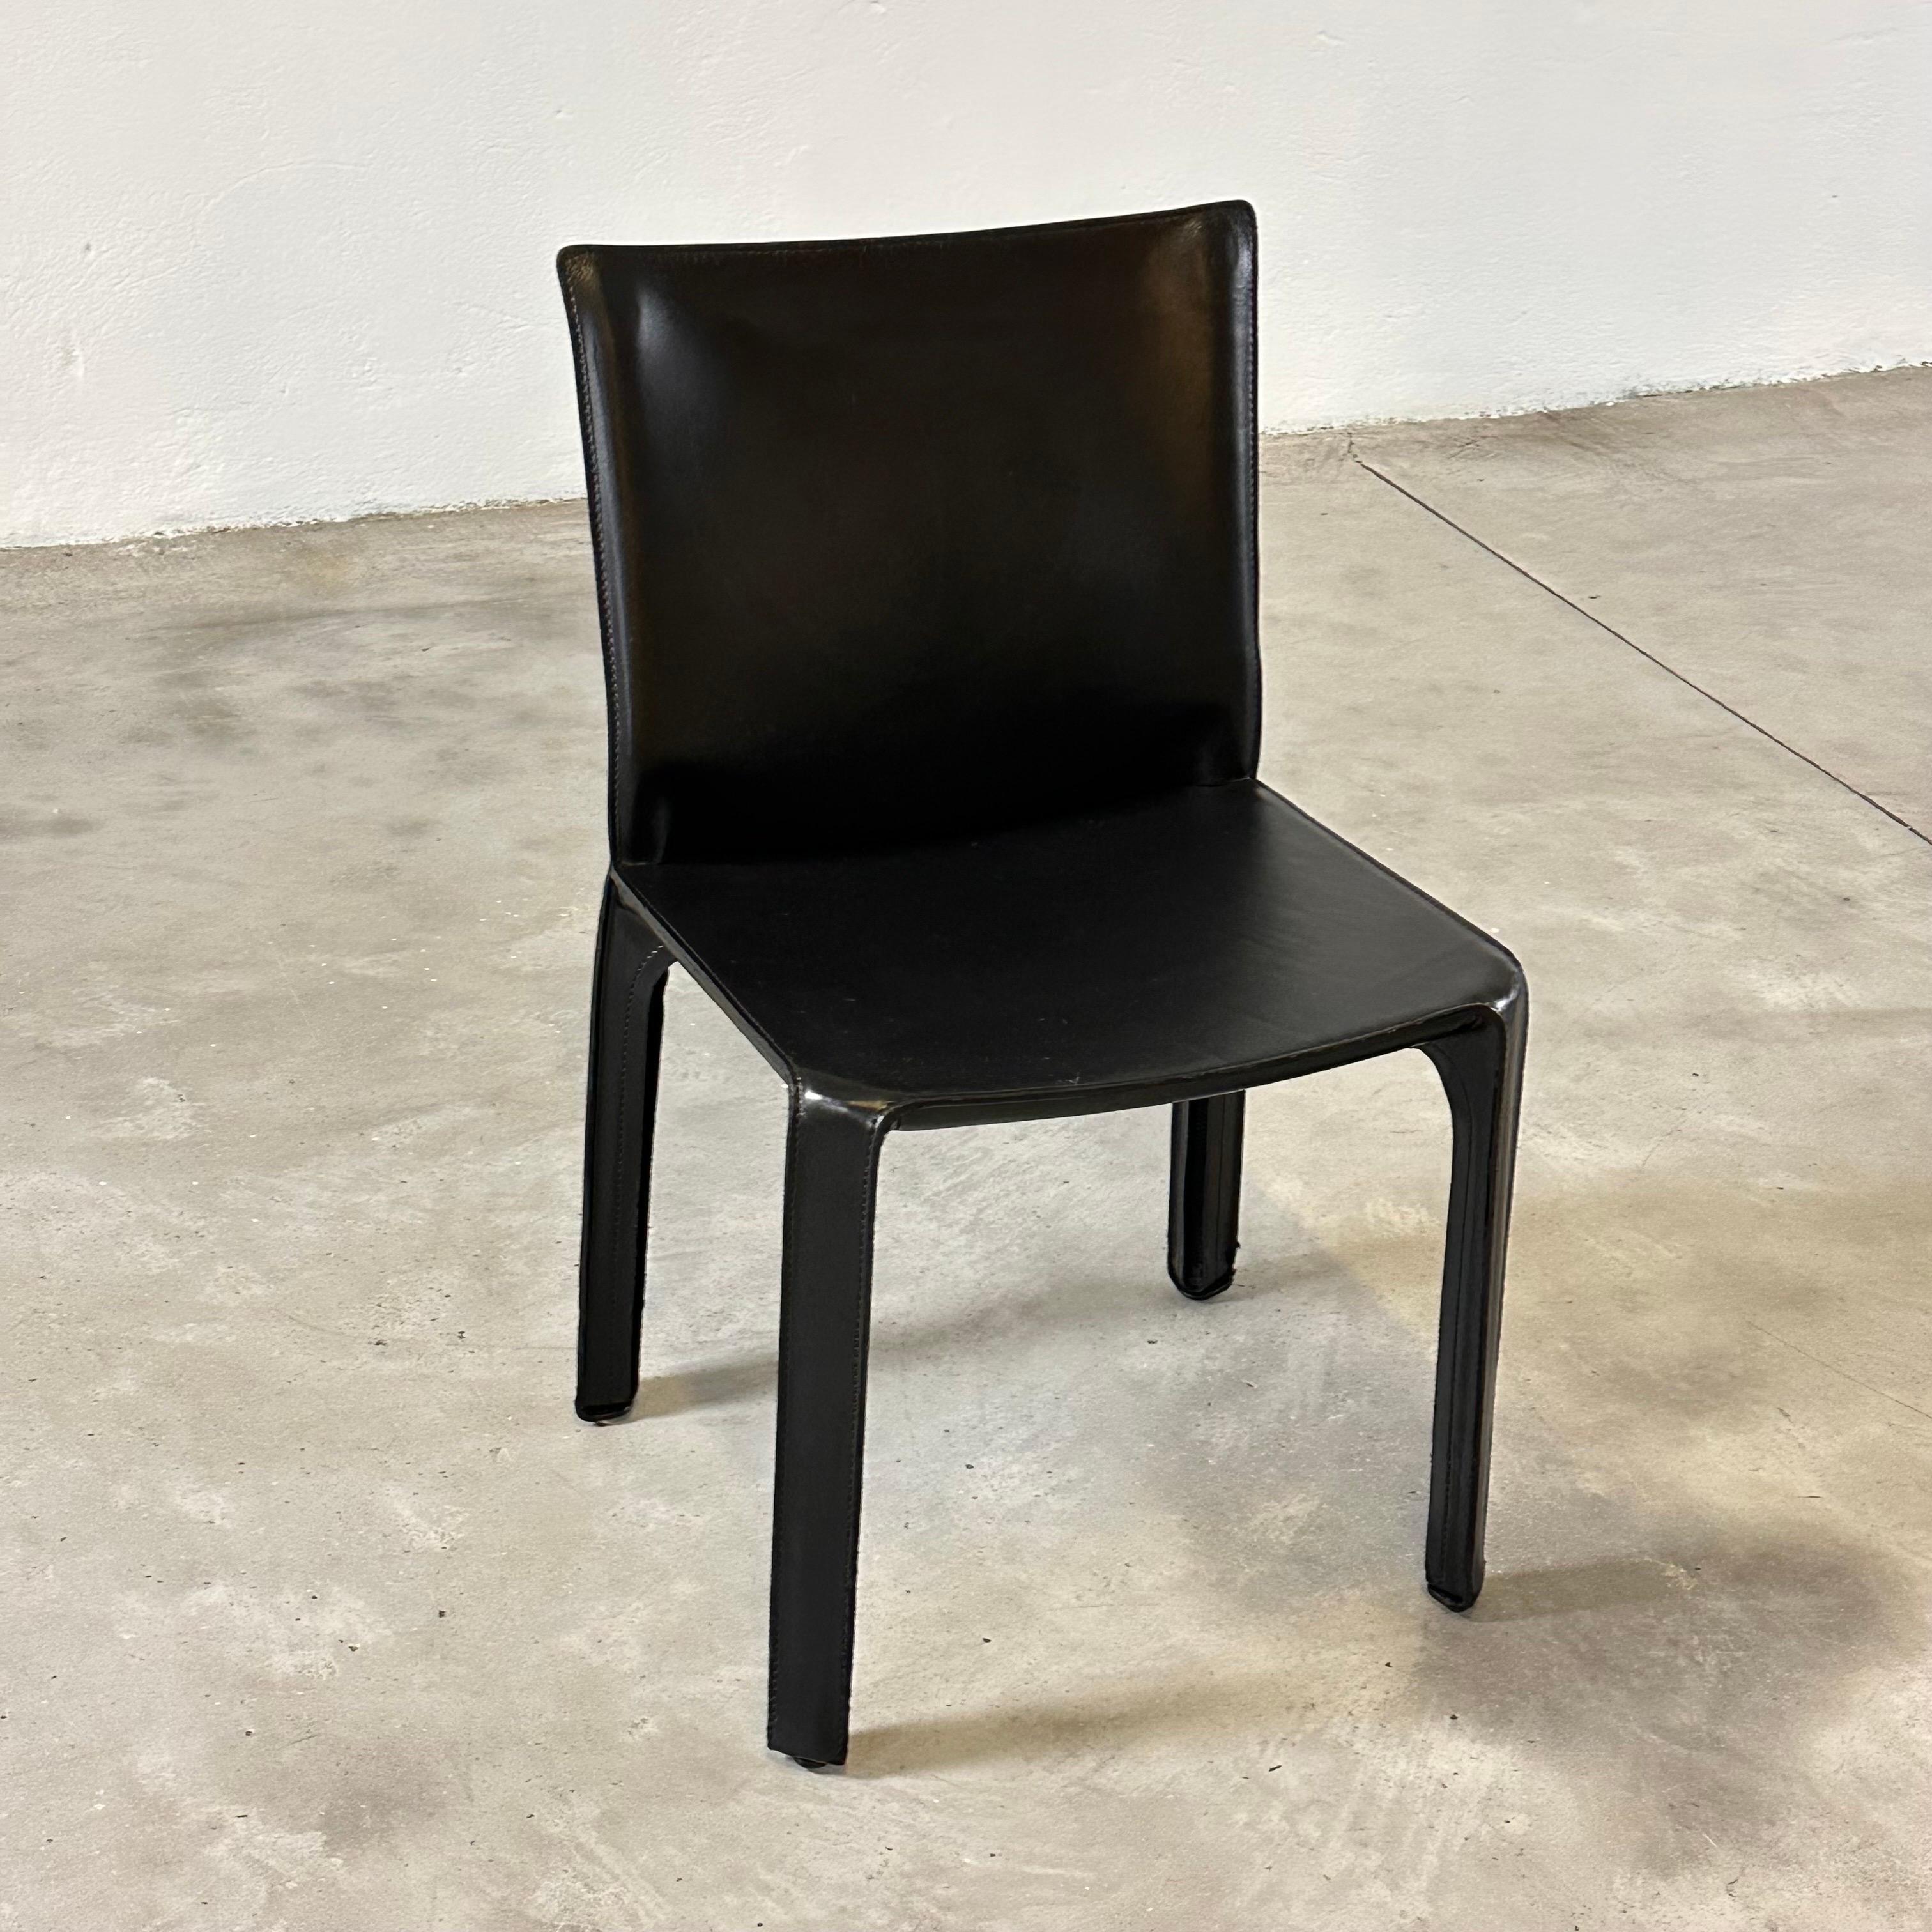 Set of Six CAB 412 Chairs by Mario Bellini for Cassina in Black Leather, 1970s For Sale 4